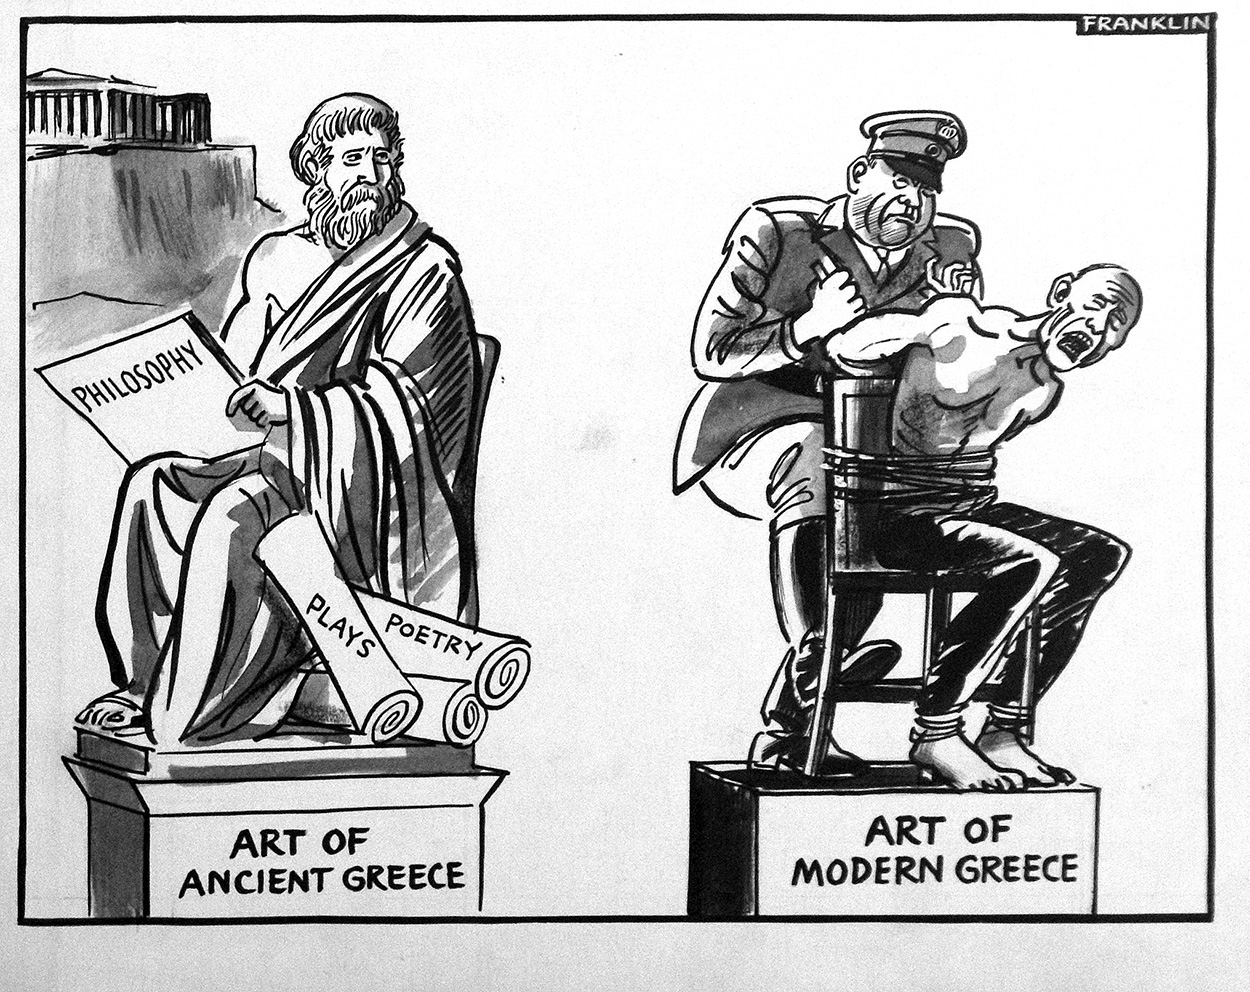 The Changing Face of Art in Greece (Original) (Signed) art by Stanley Arthur Franklin at The Illustration Art Gallery